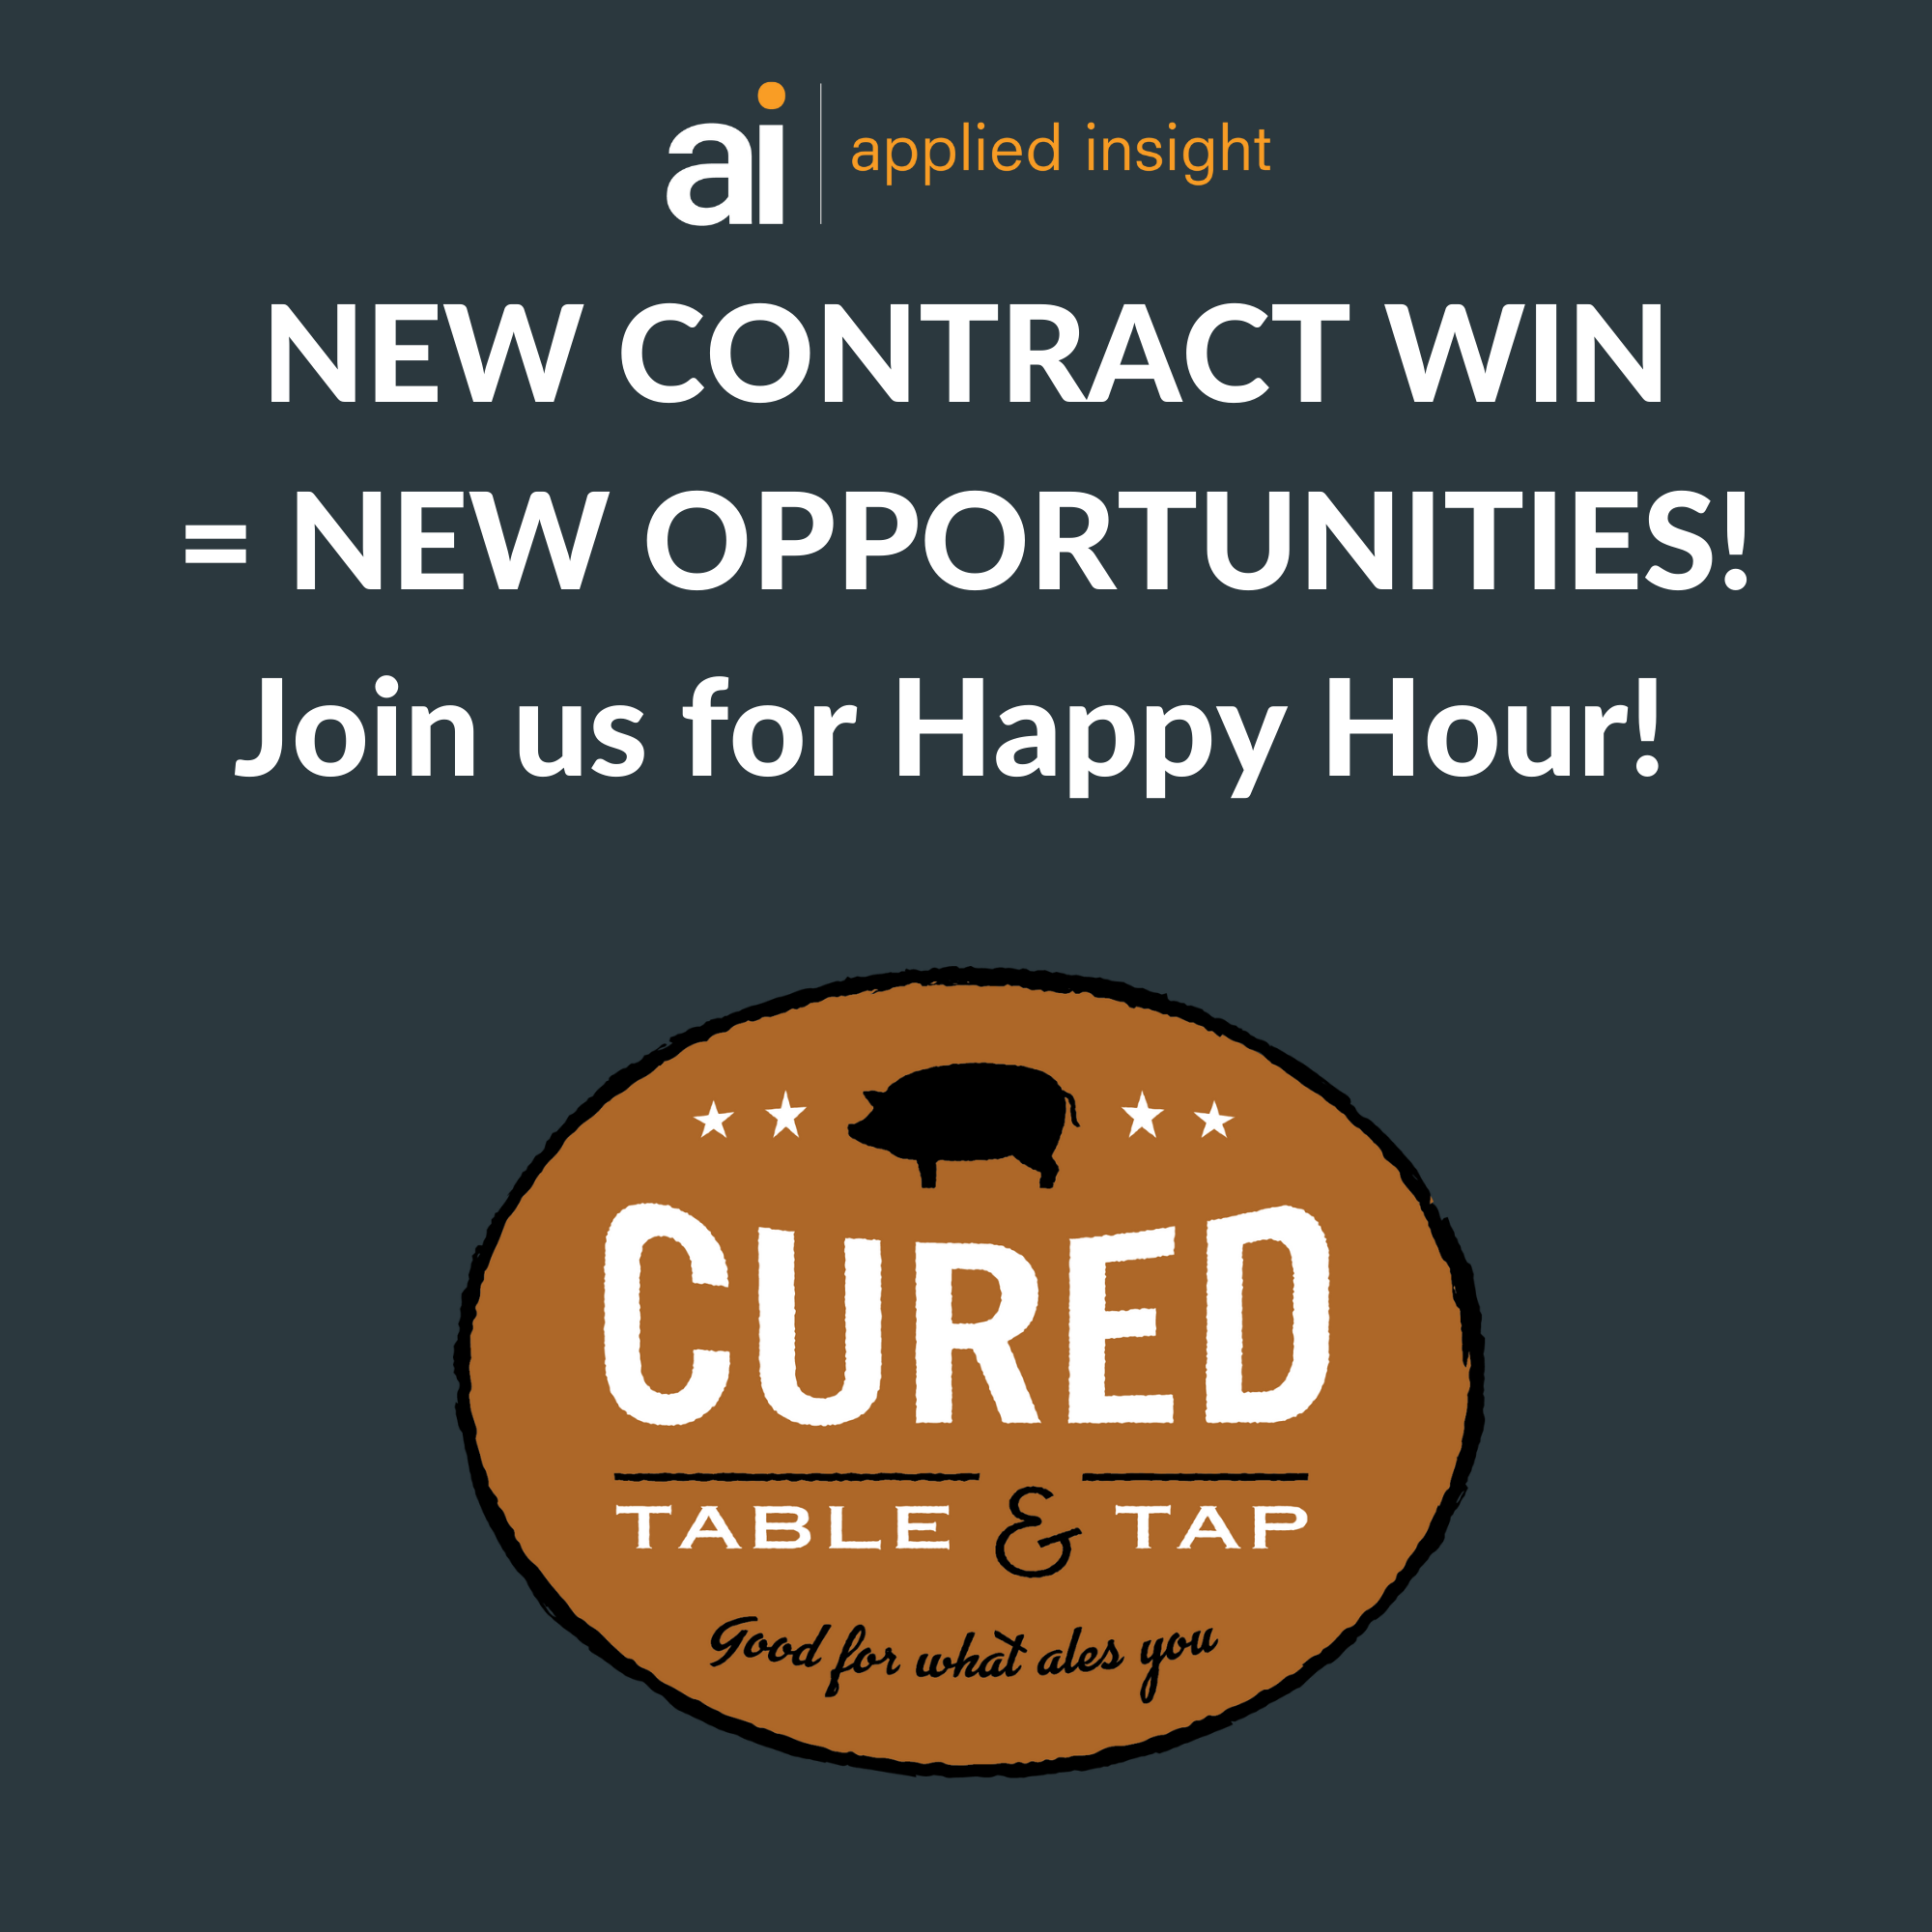 New Contract, New Opportunities! Happy Hour June 29th!